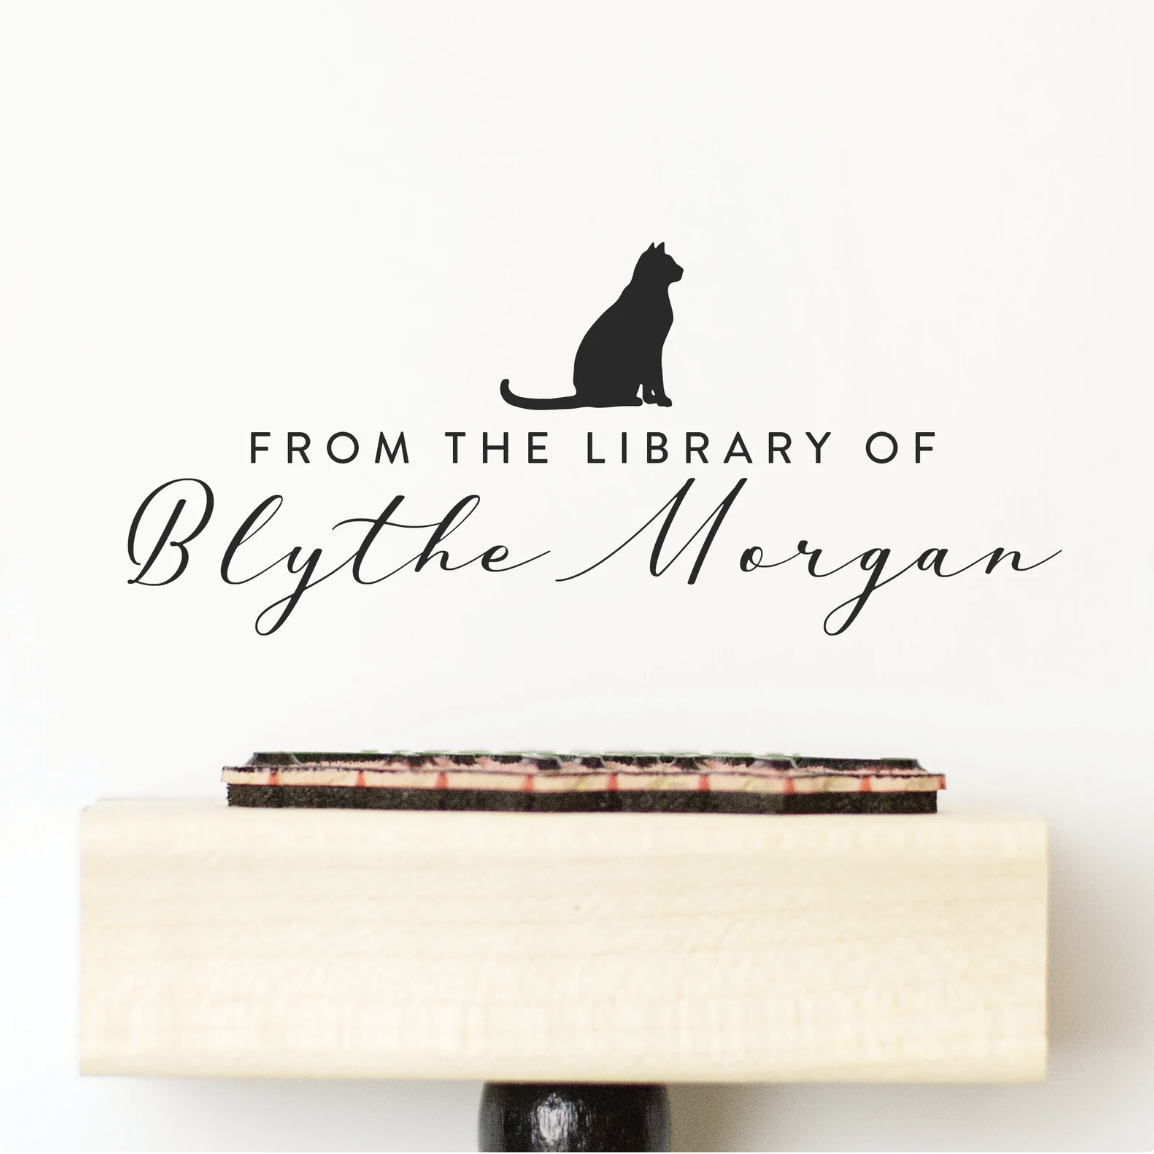 A rubber stamp on a wooden block below a stamp in black ink on a white page with an outline of a cat in profile and the text "From the library of Blythe Morgan"